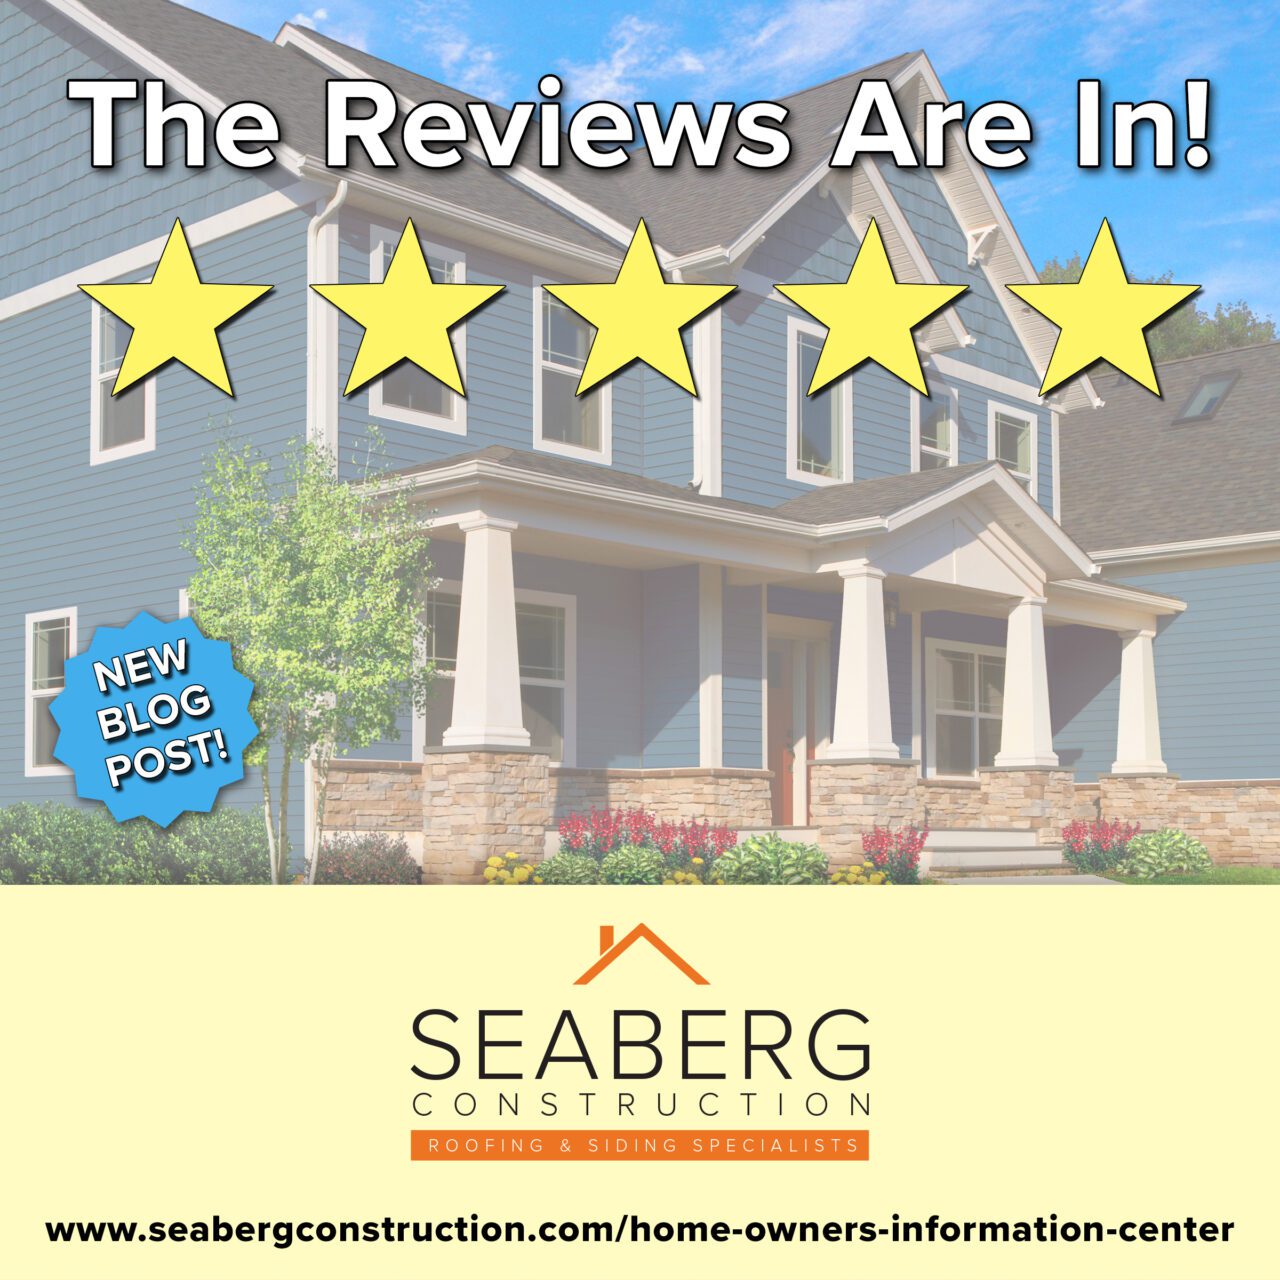 Seaberg Construction Blog: The Reviews Are In!